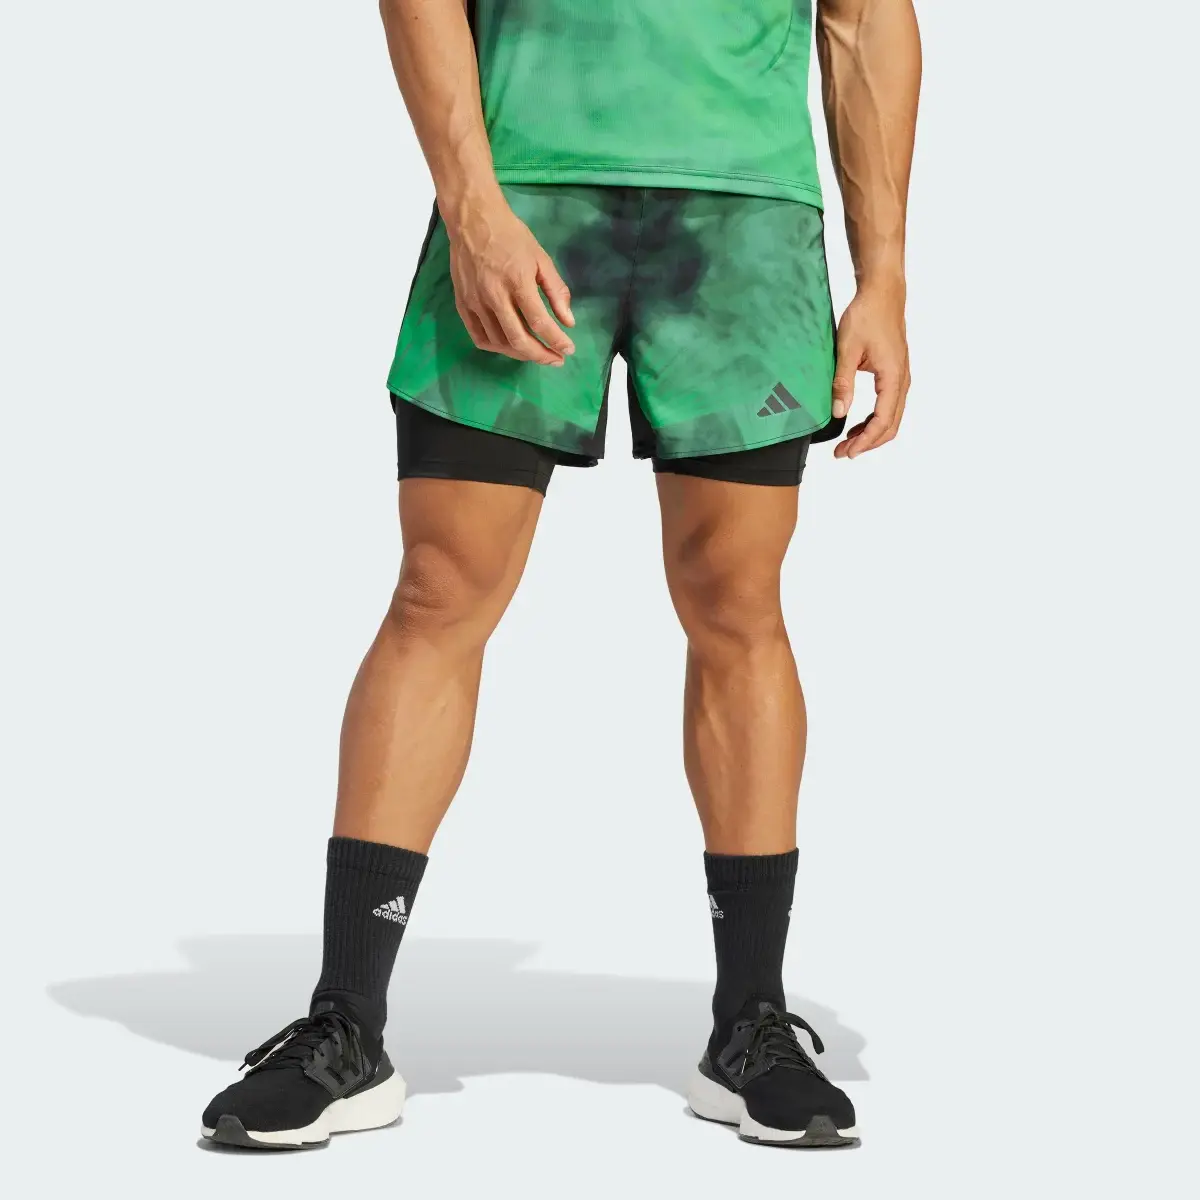 Adidas Berlin Running Two-in-One Shorts. 1